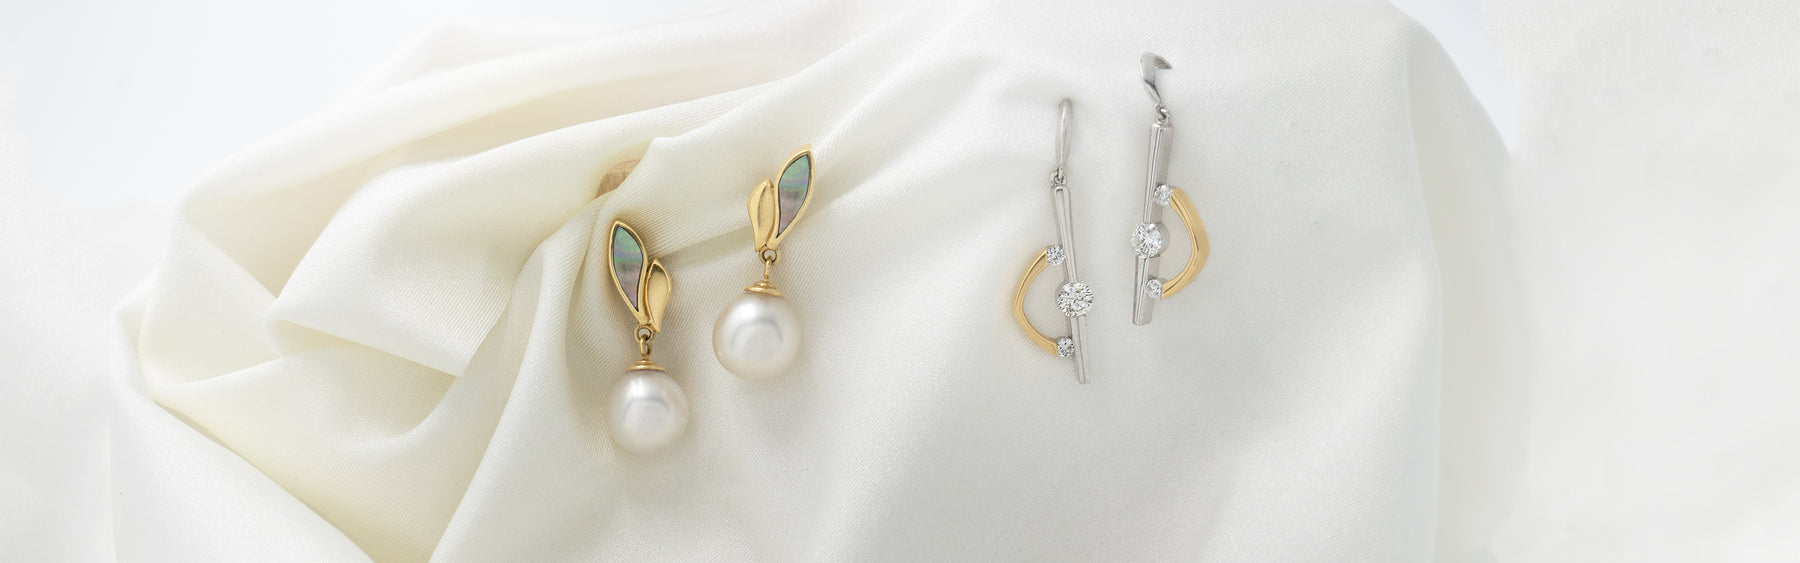 Ready To Ship Custom and Designer Diamond and Pearl Earrings